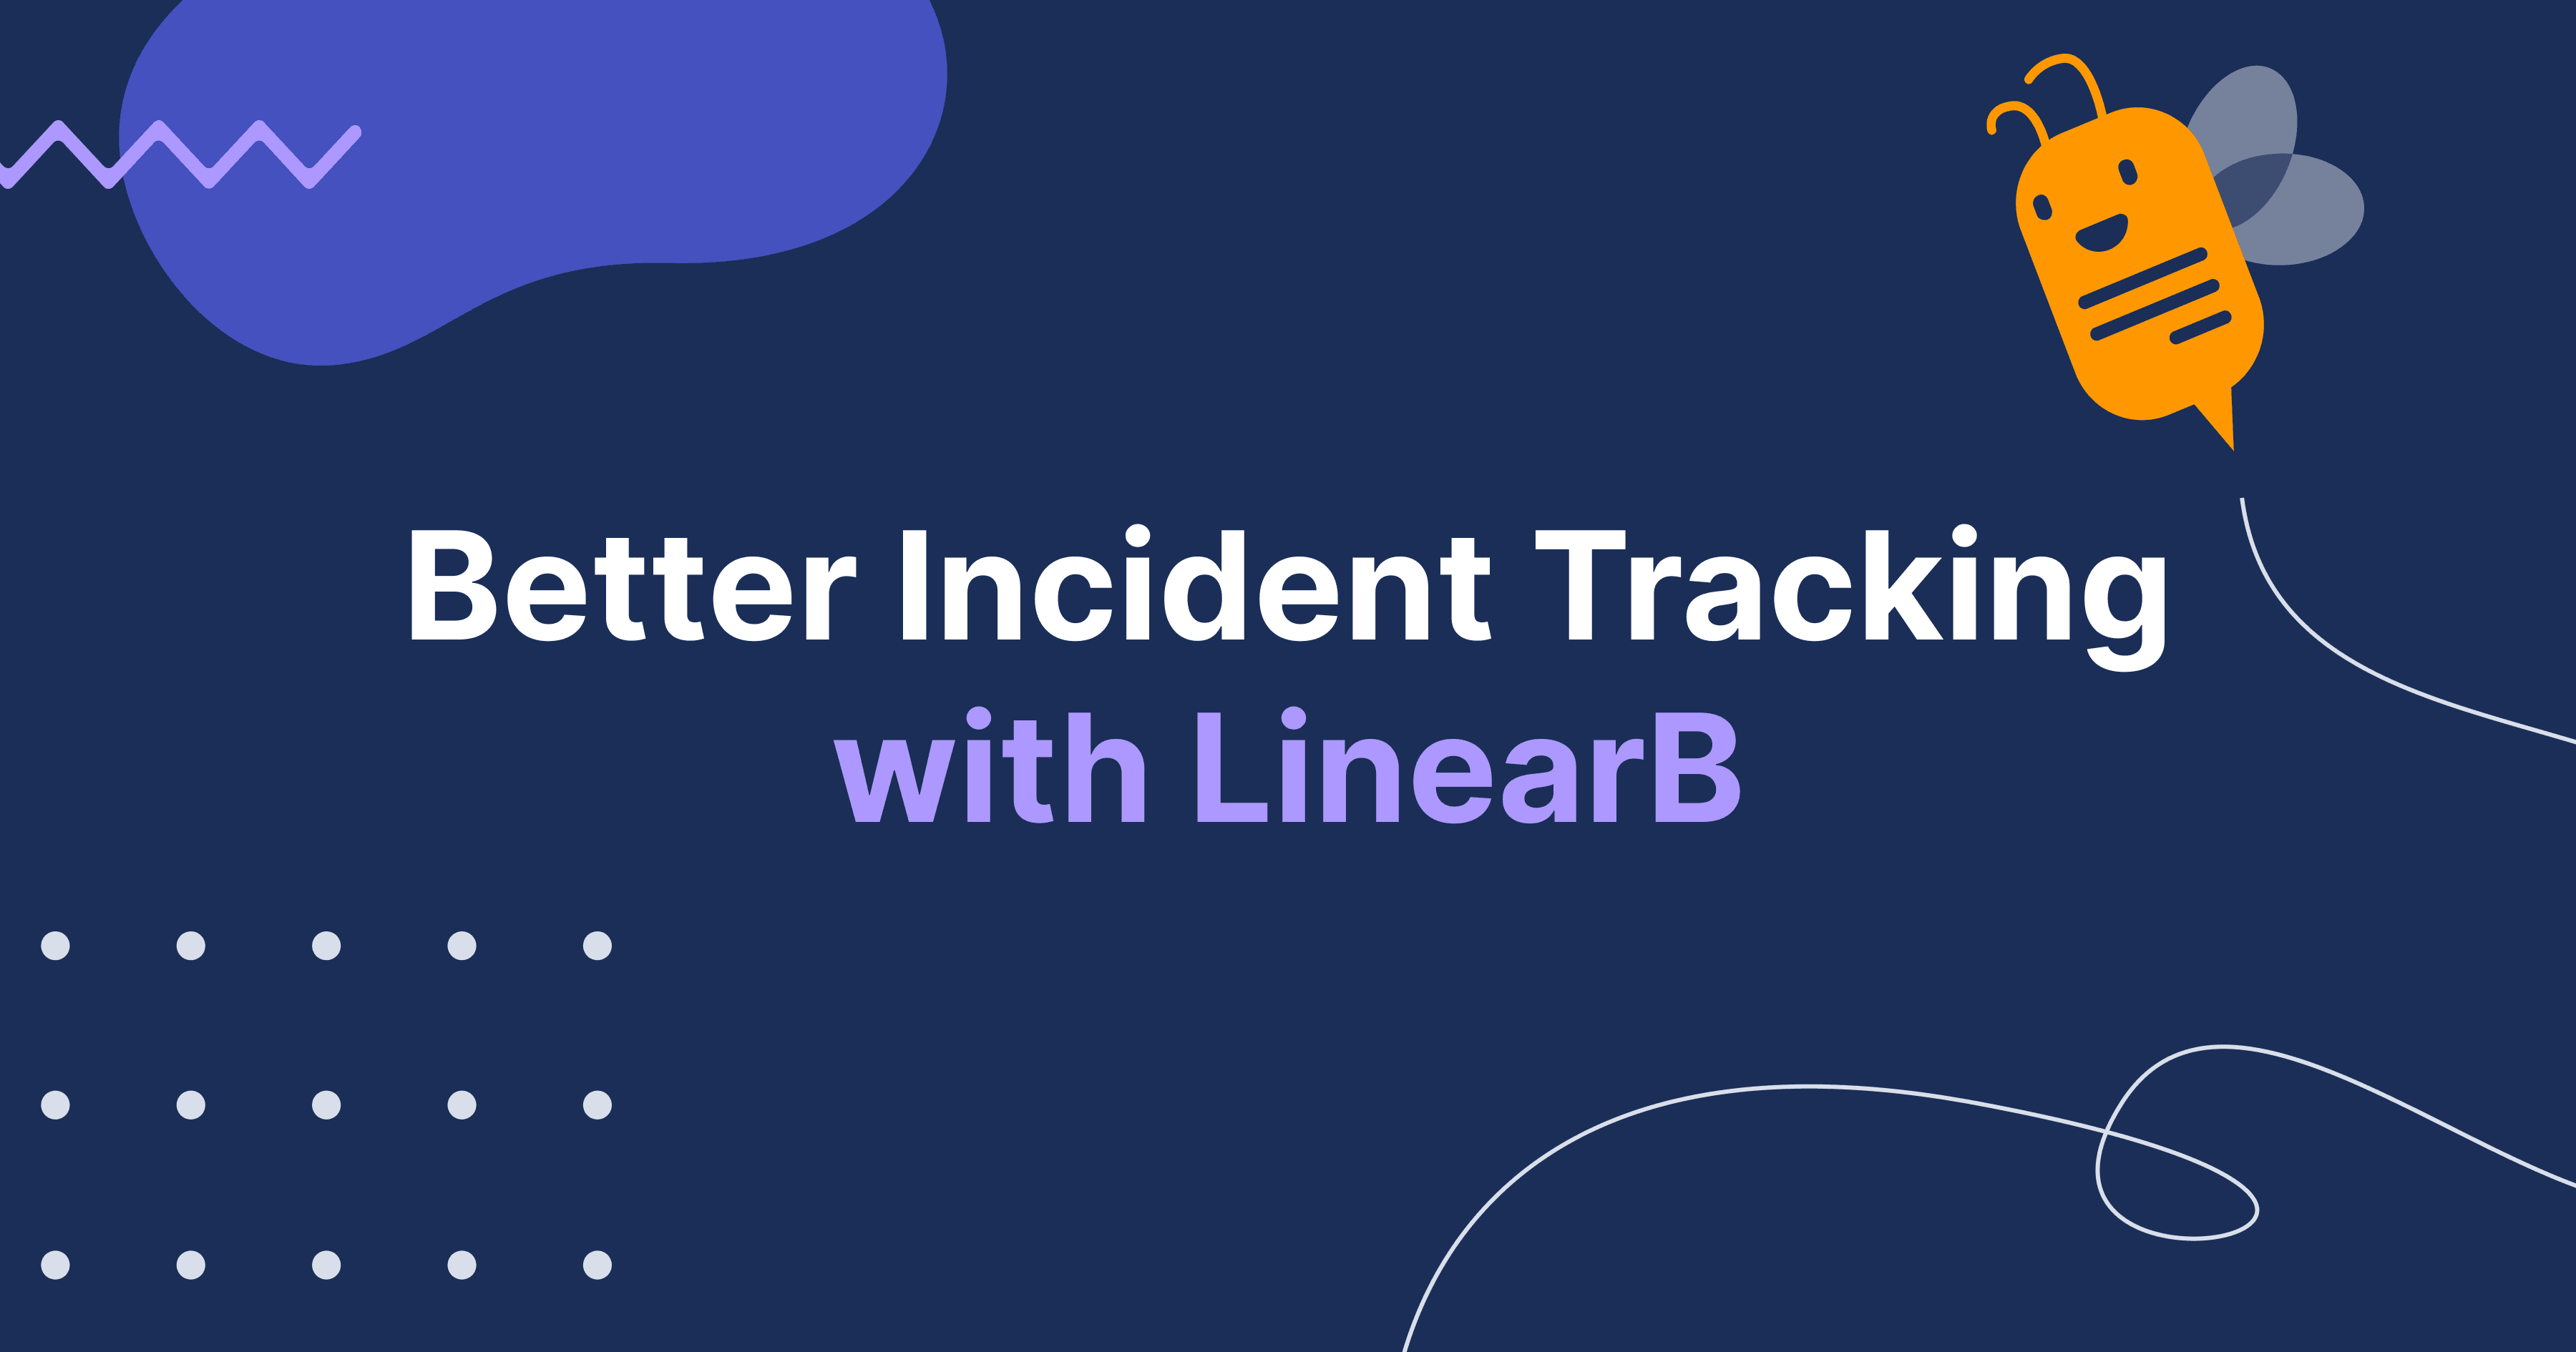 Better Incident Tracking with LinearB